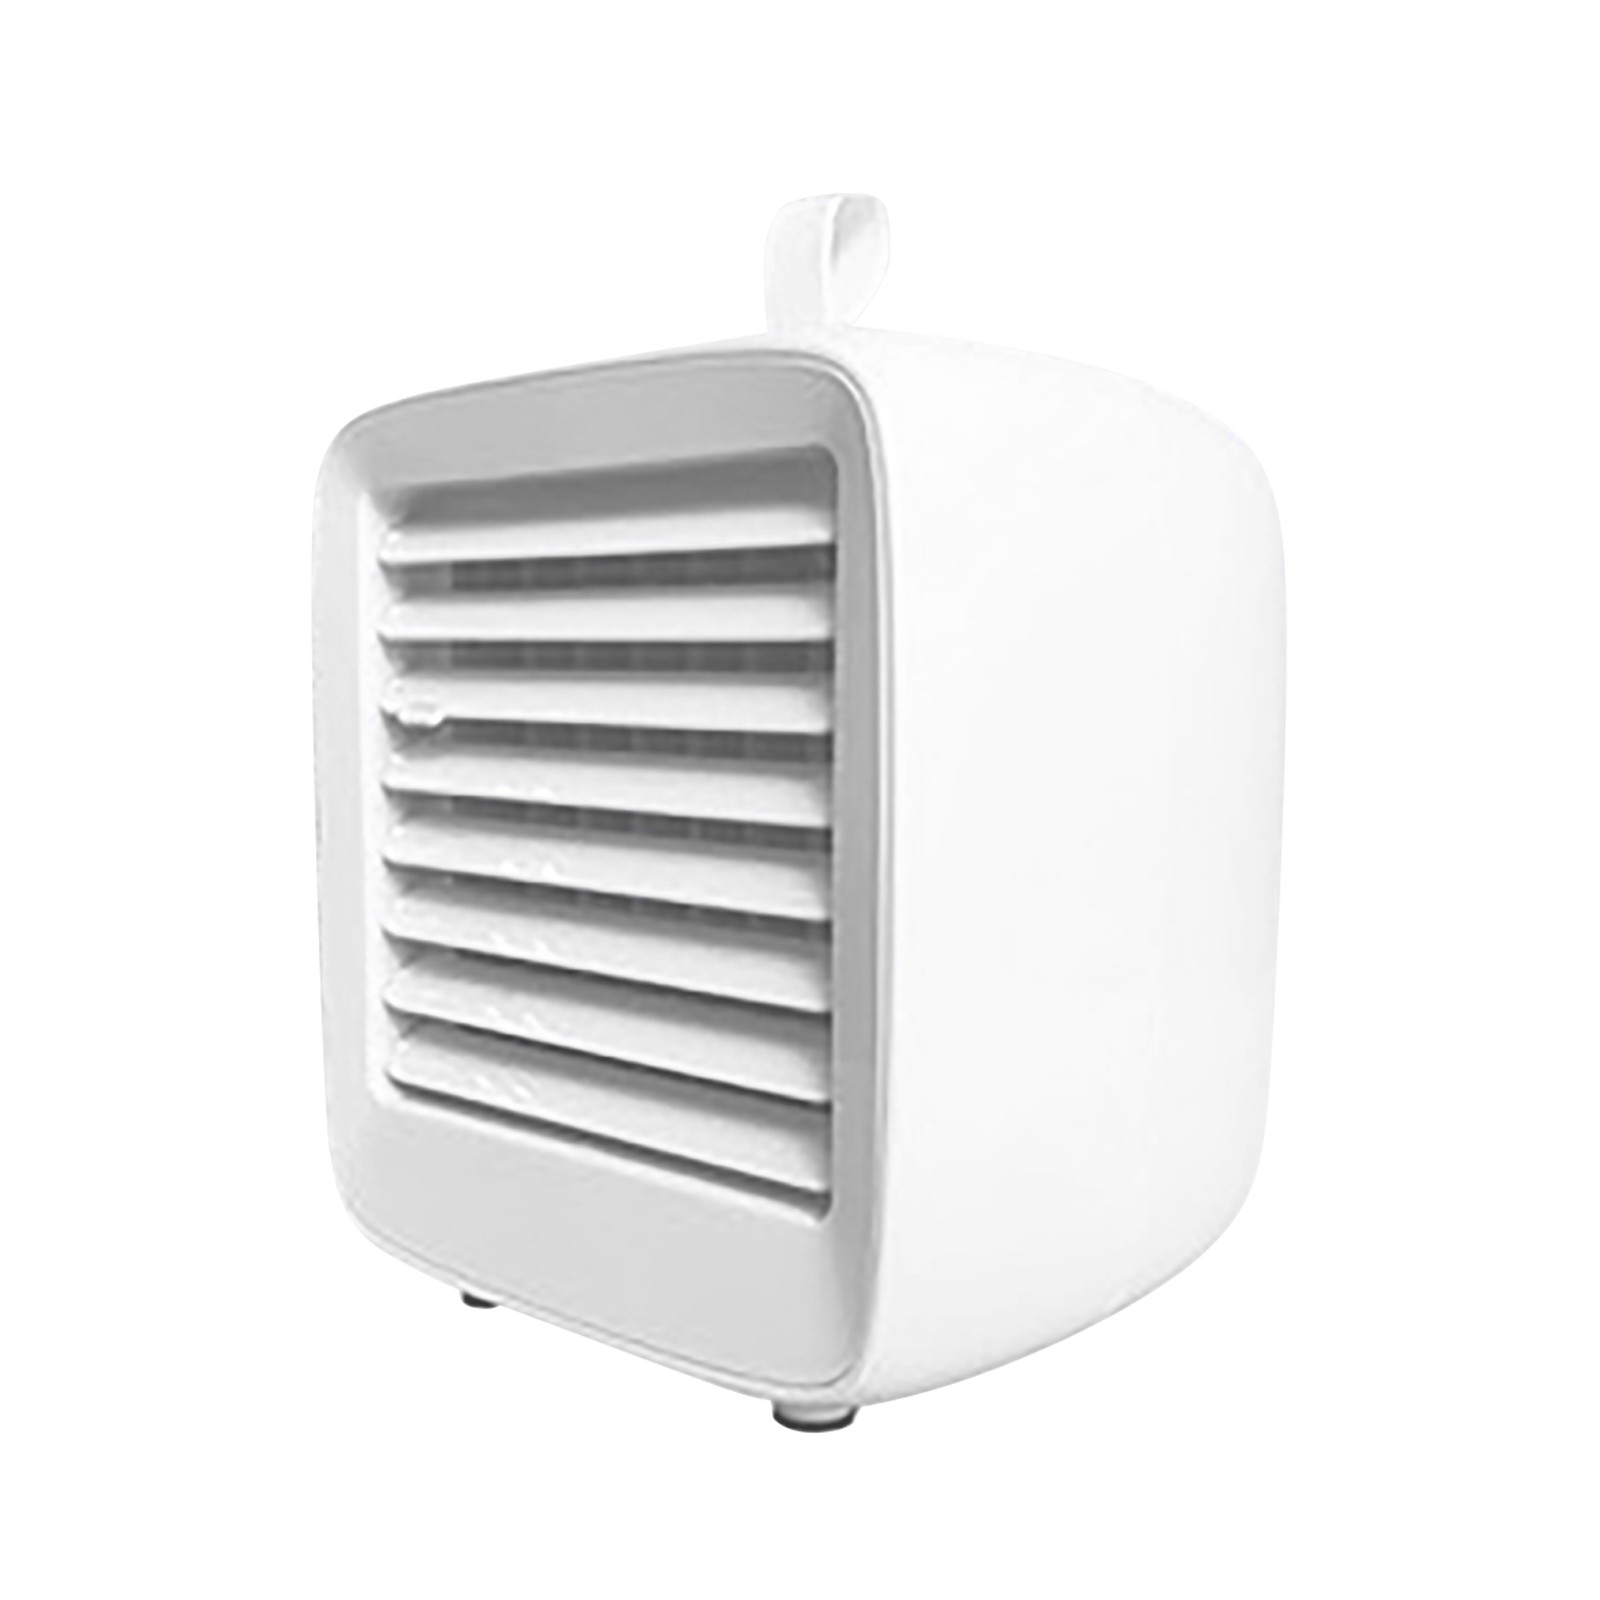 OAVQHLG37B Portable Air Conditioners USB Mini Air Cooler Portable Desktop Cooling Fan Student Dormitory Air Condition - image 1 of 5